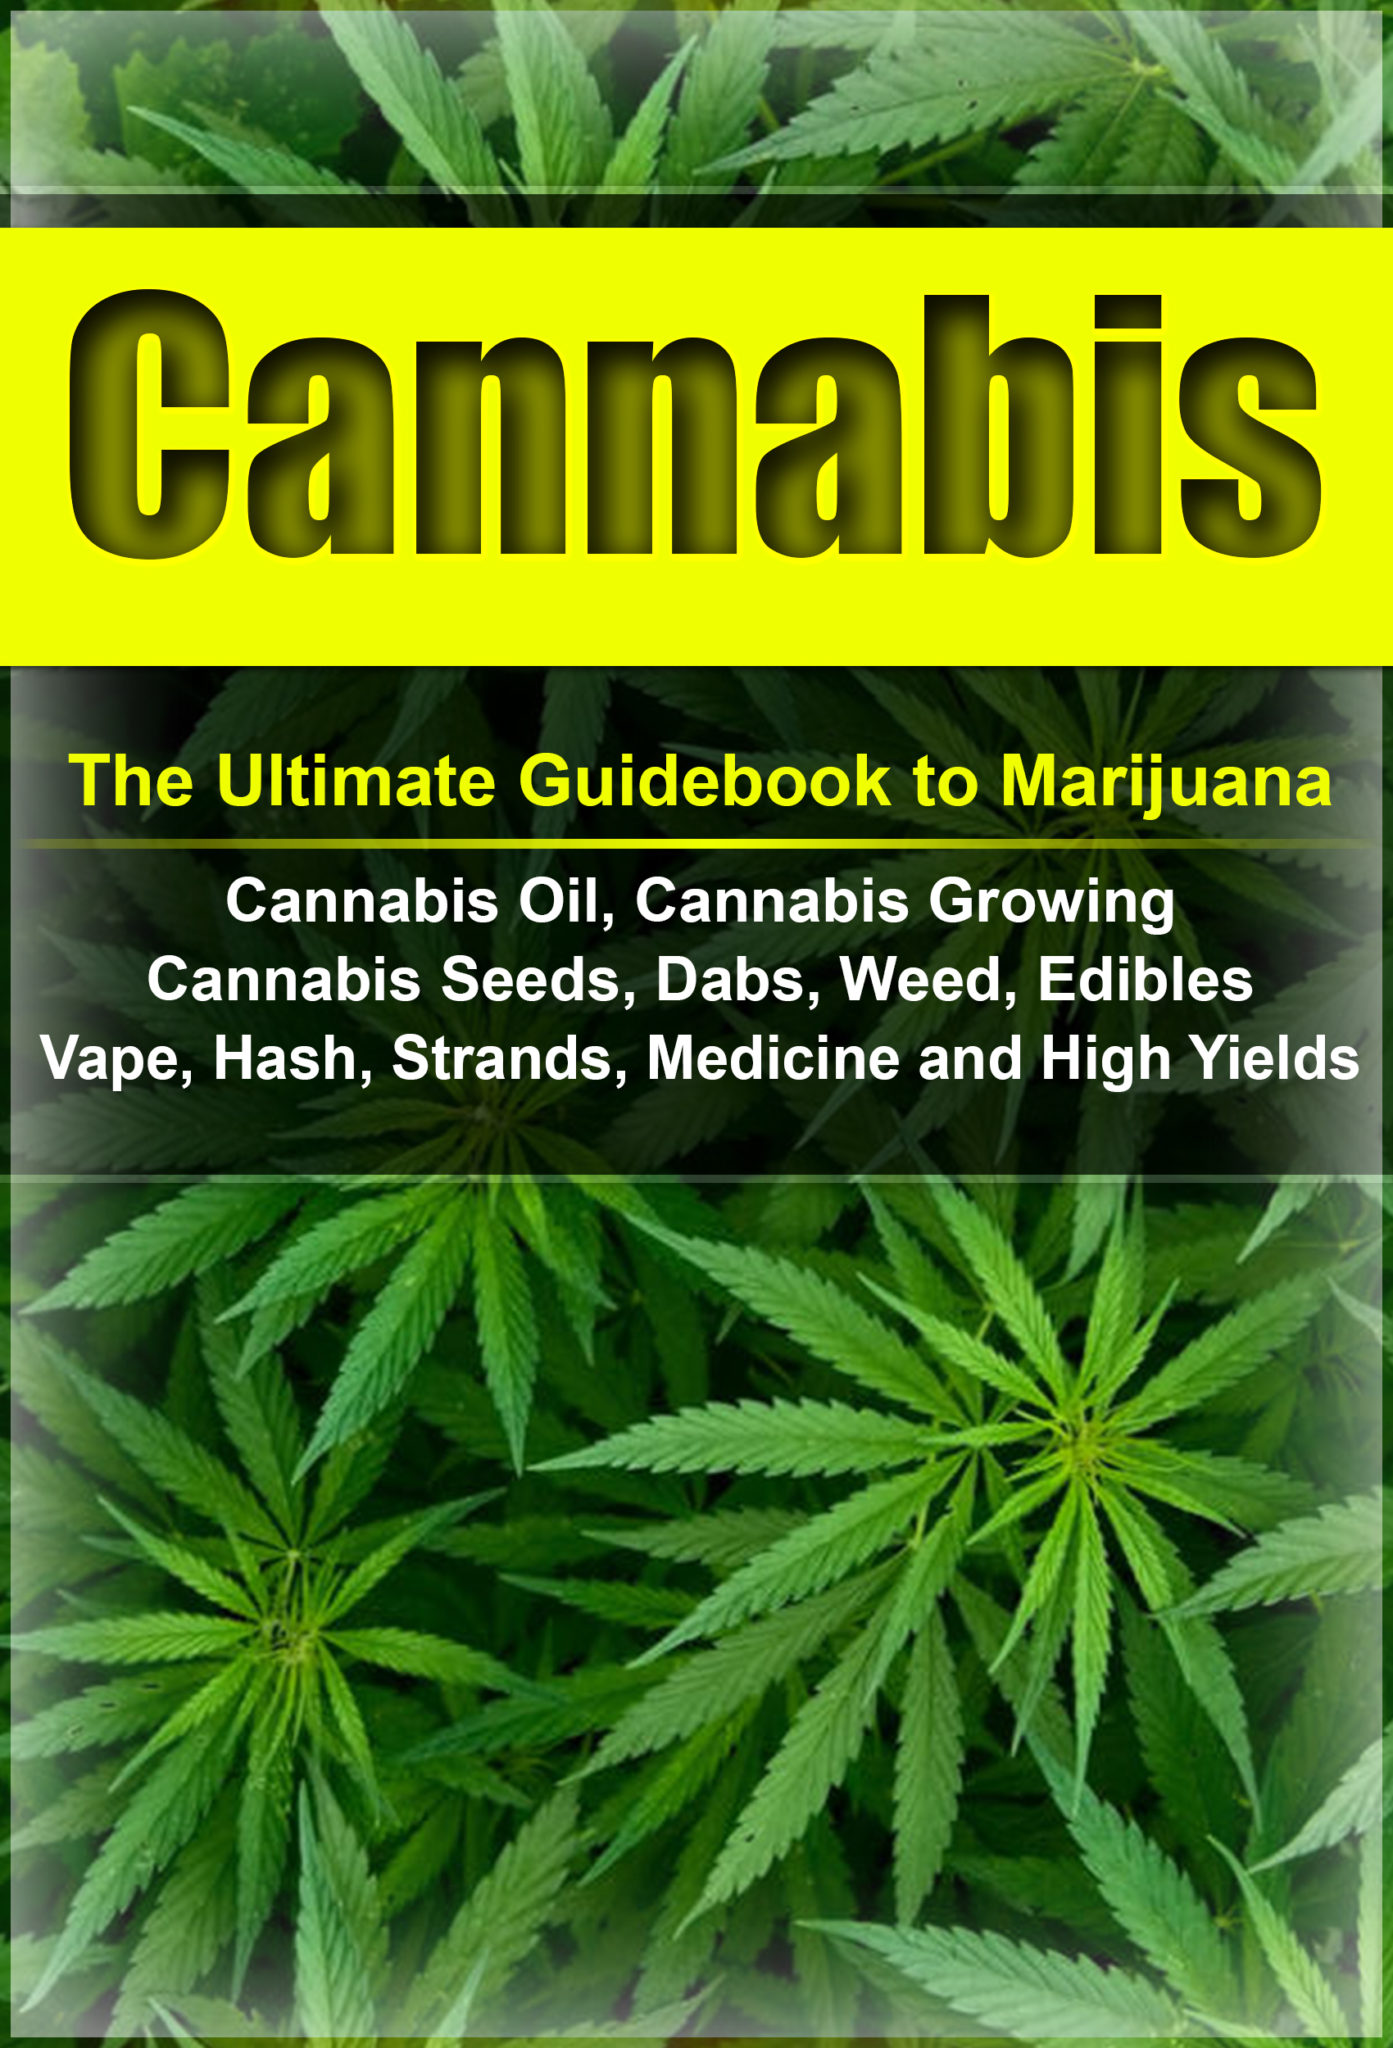 FREE: Cannabis: The Ultimate Guide to Marijuana, Cannabis Oil, Cannabis Growing, Cannabis Seeds, Dabs, Edibles, Vapes, Hash, Strands, Medicine and High Yields by Ziggie Woodworth